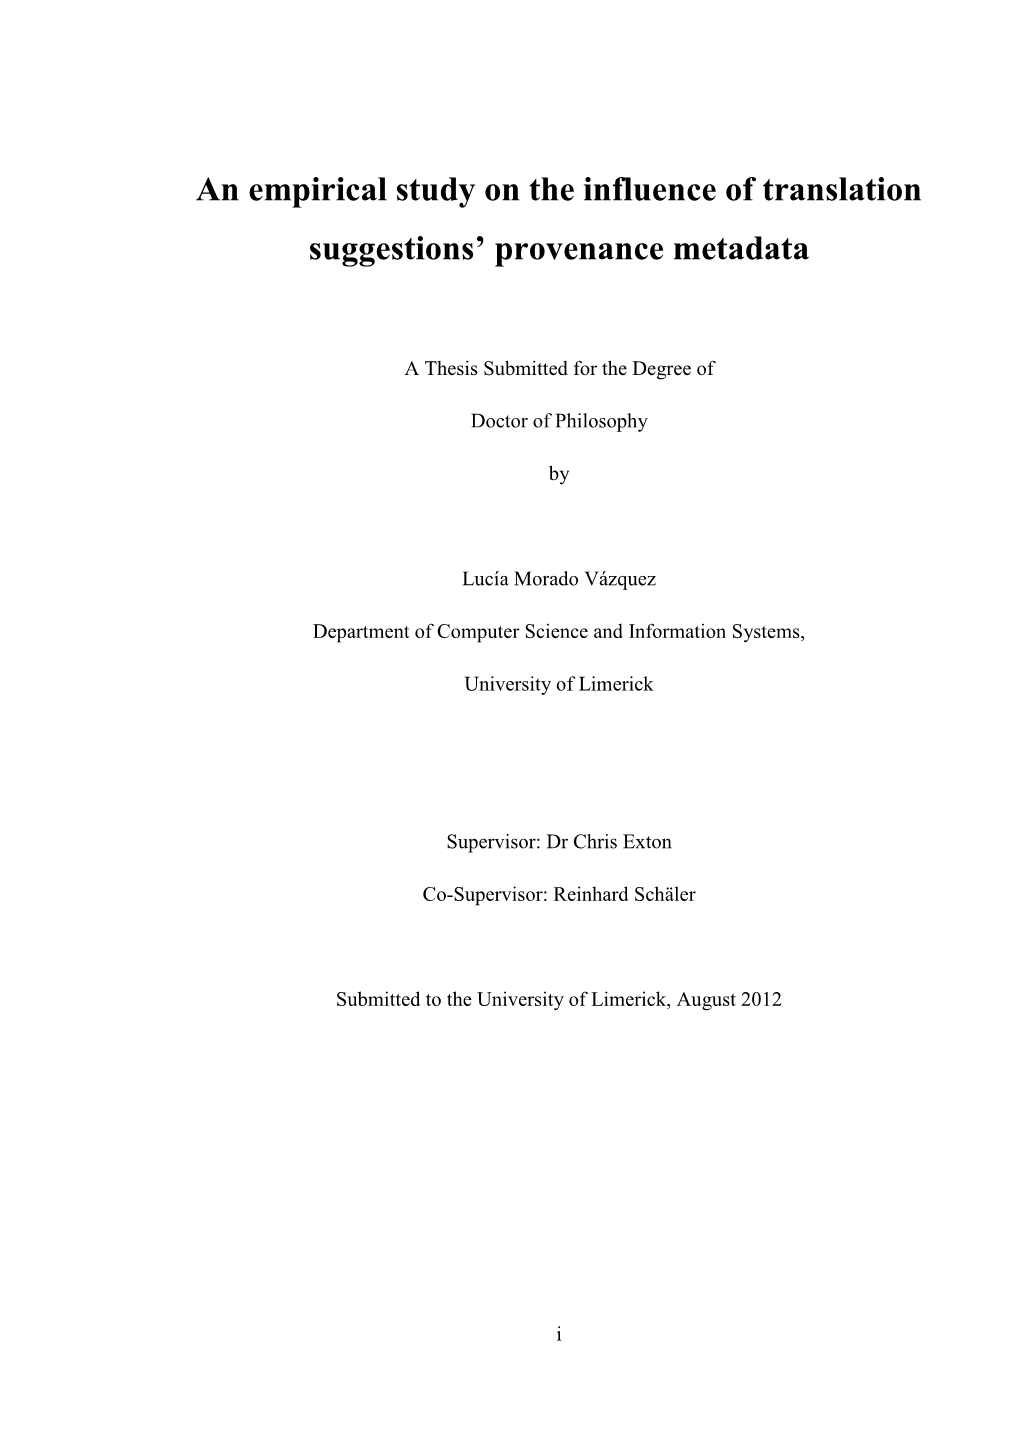 An Empirical Study on the Influence of Translation Suggestions’ Provenance Metadata